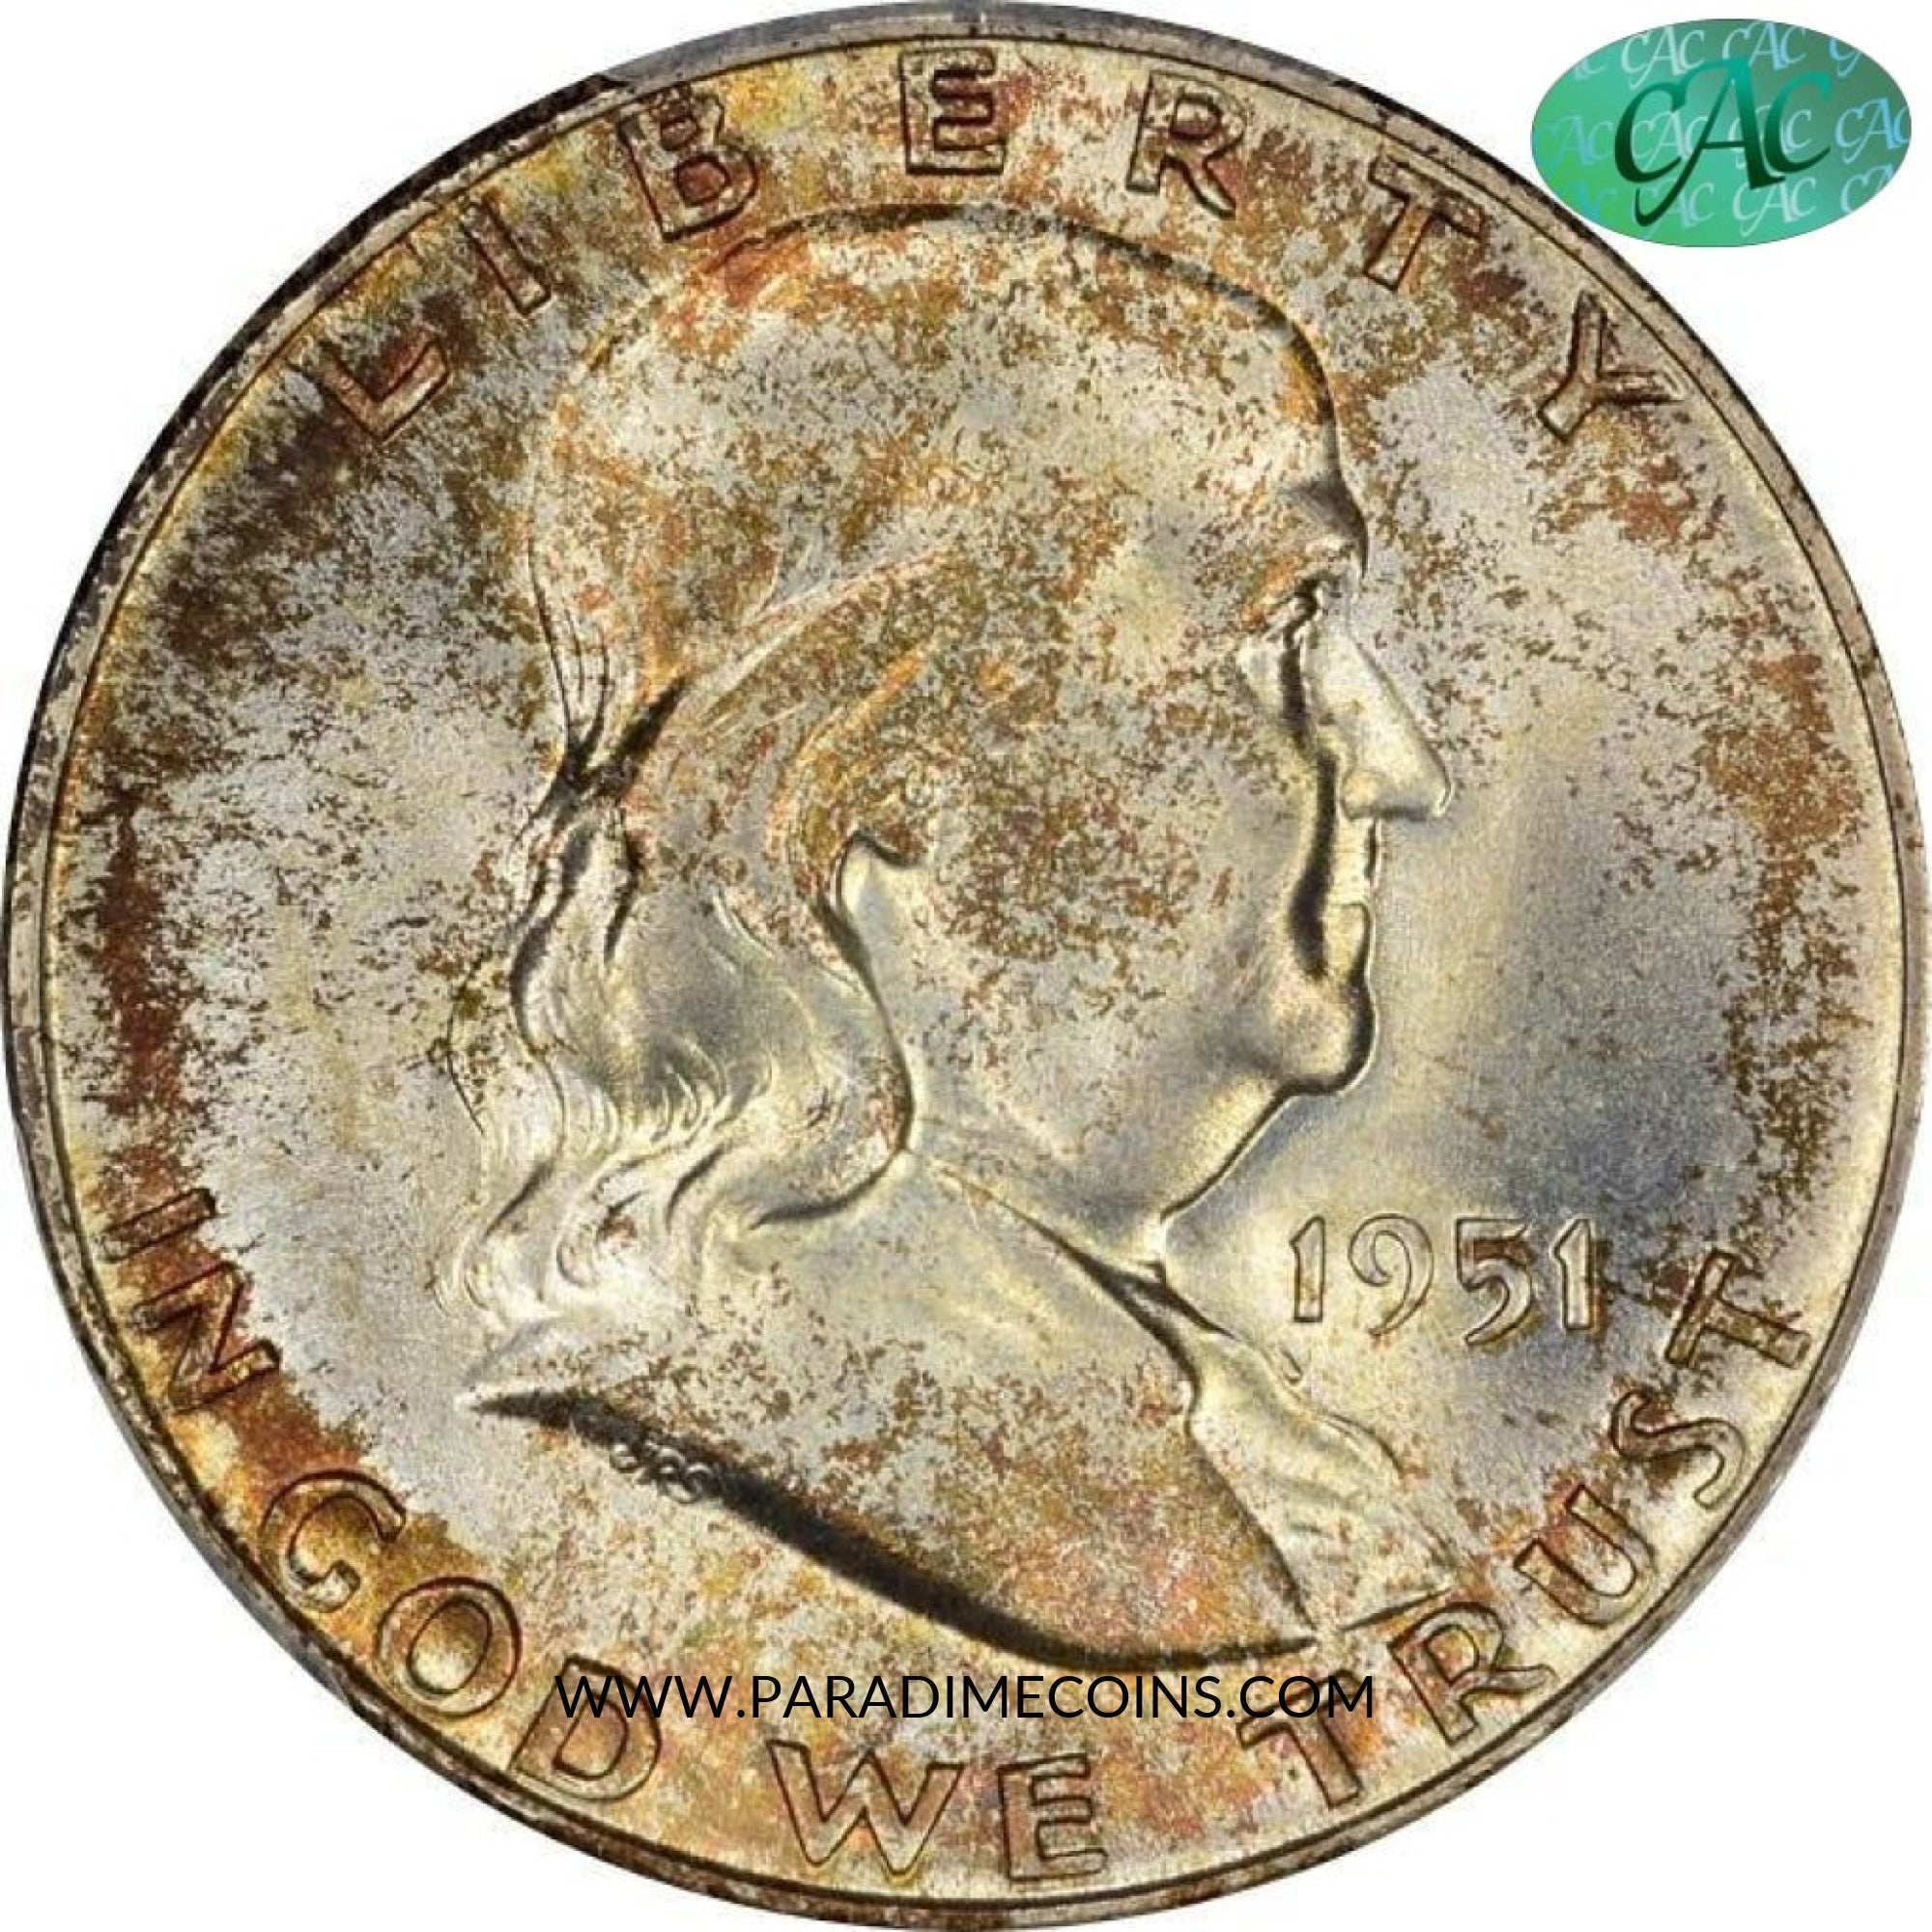 1951 50C MS66+ PCGS CAC - Paradime Coins | PCGS NGC CACG CAC Rare US Numismatic Coins For Sale